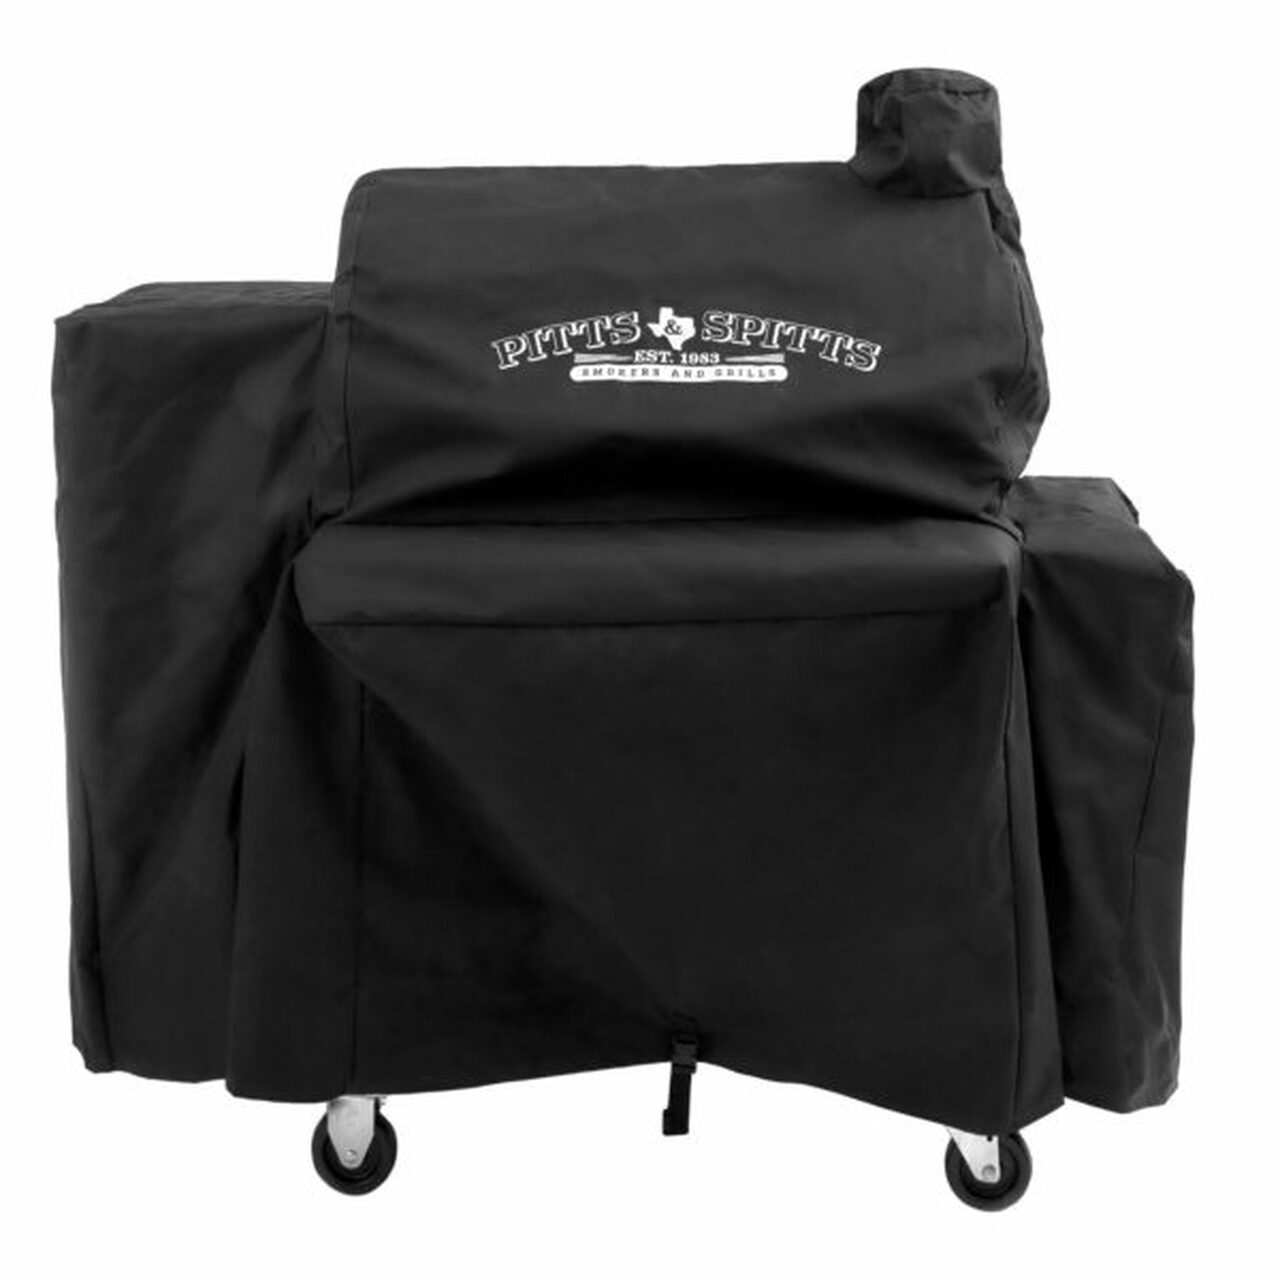 Pitts & Spitts Maverick Grill Cover Pitts & Spitts Indigo Pool Patio BBQ